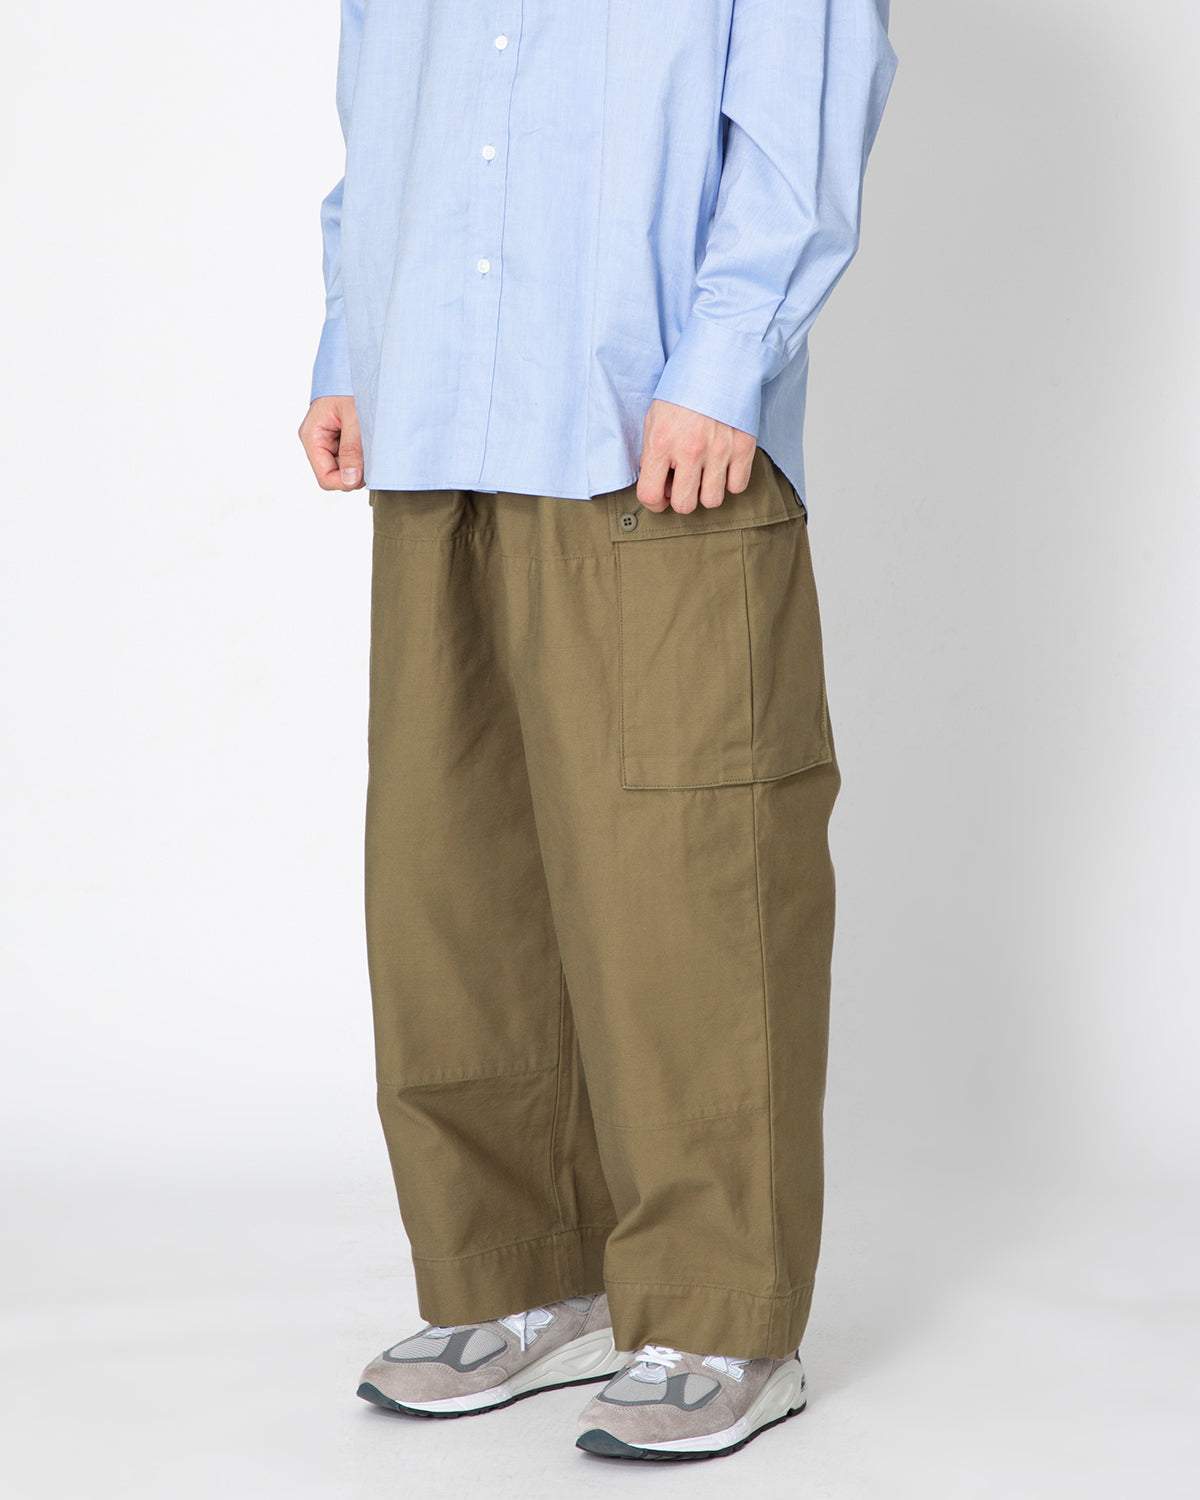 A.PRESSE/3 Military Dress Trousers-